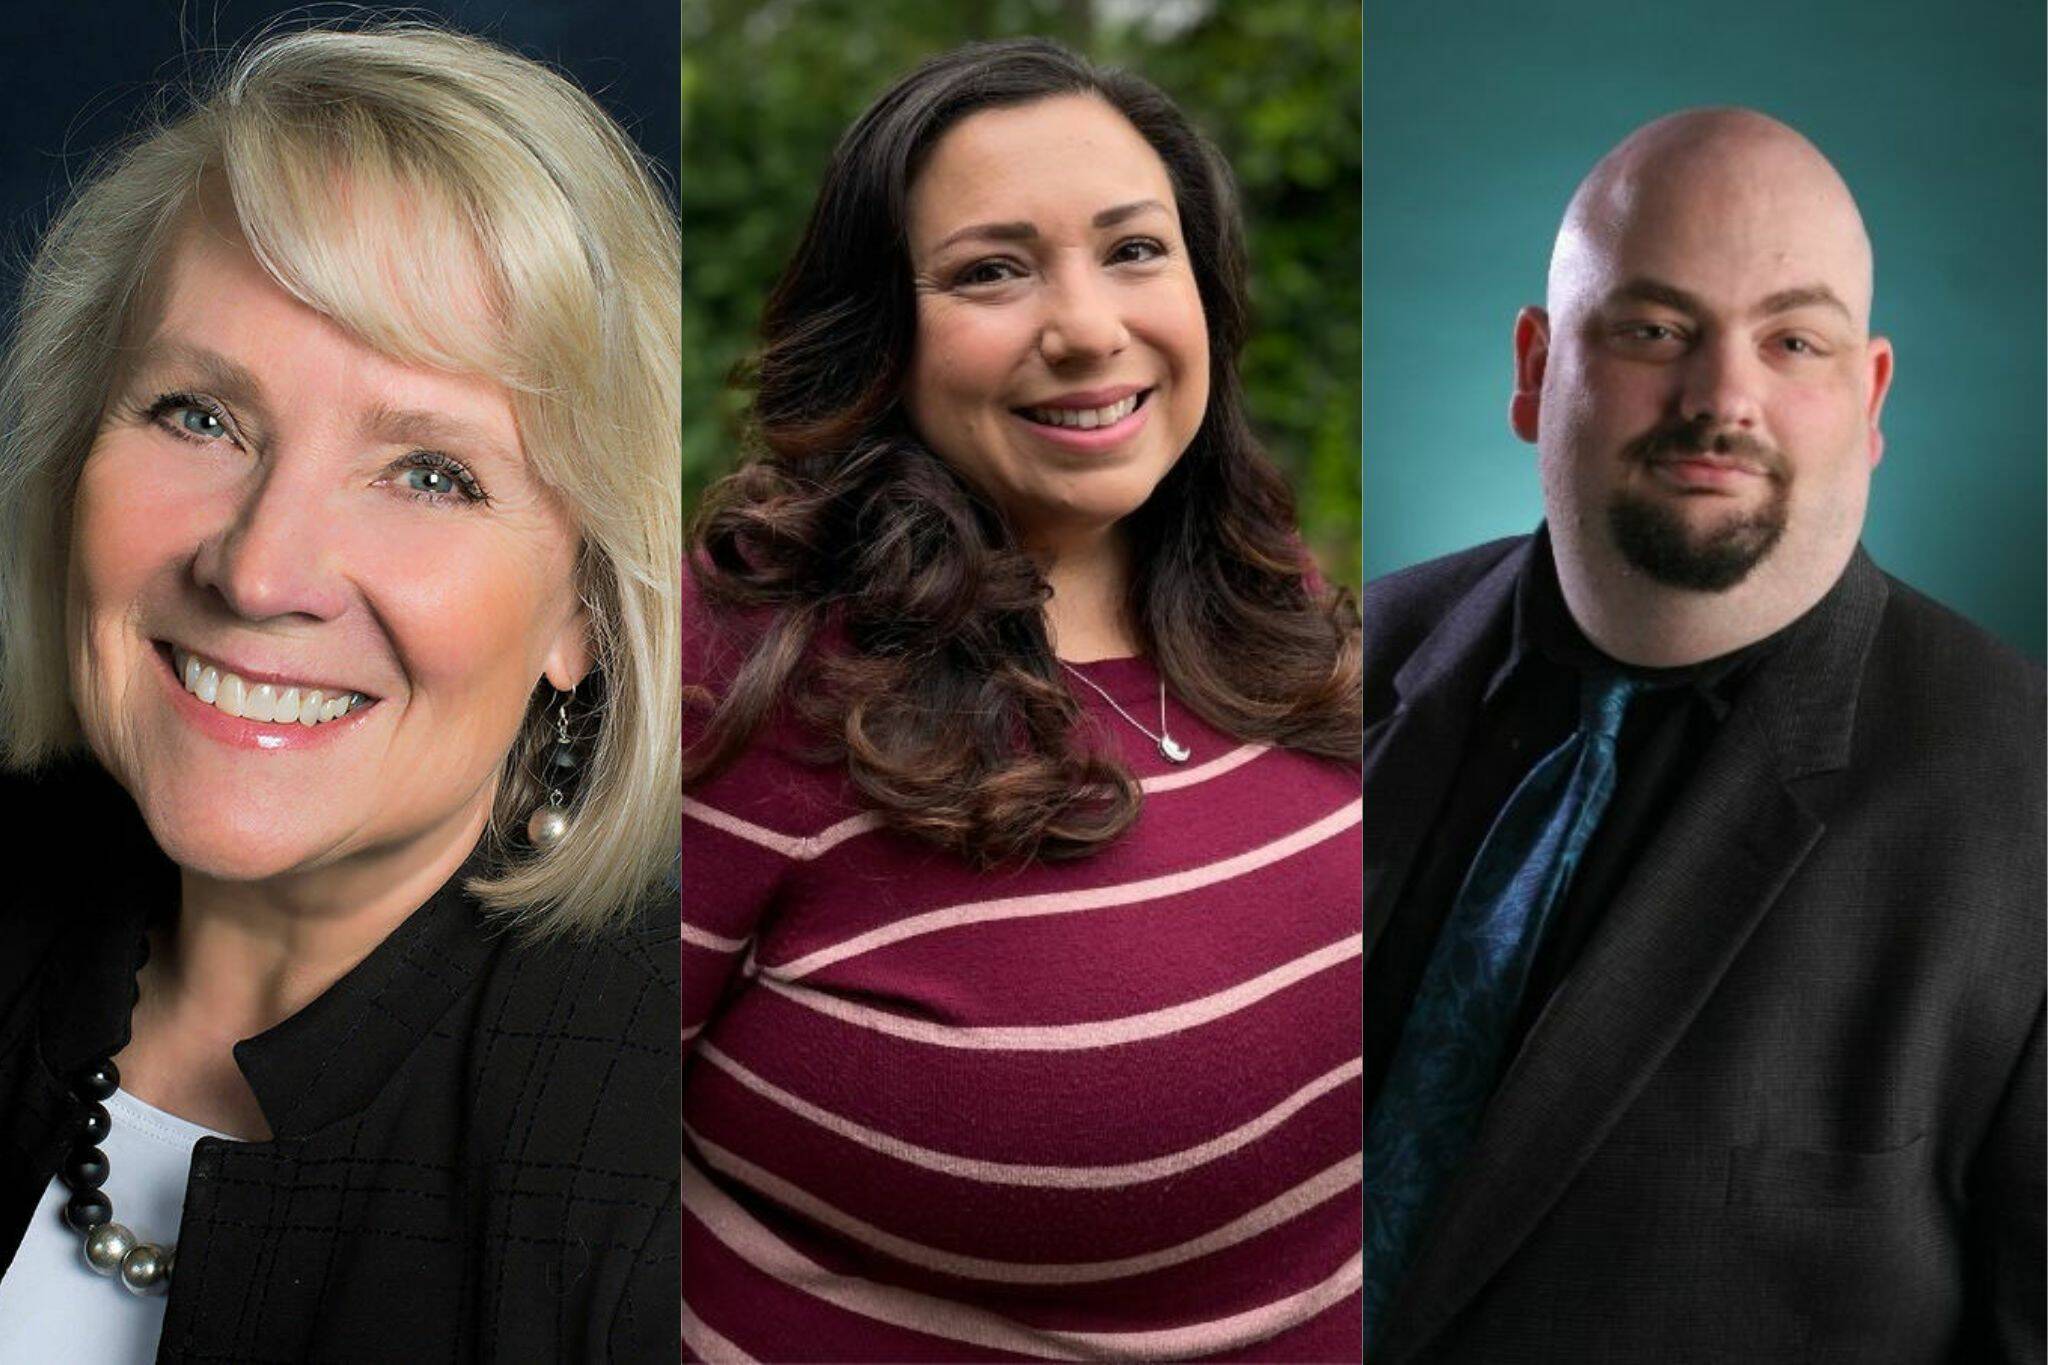 Everett City Council, Position 7 candidates (from left) Judy Tuohy, Judith Martinez and Bryce Nickel.